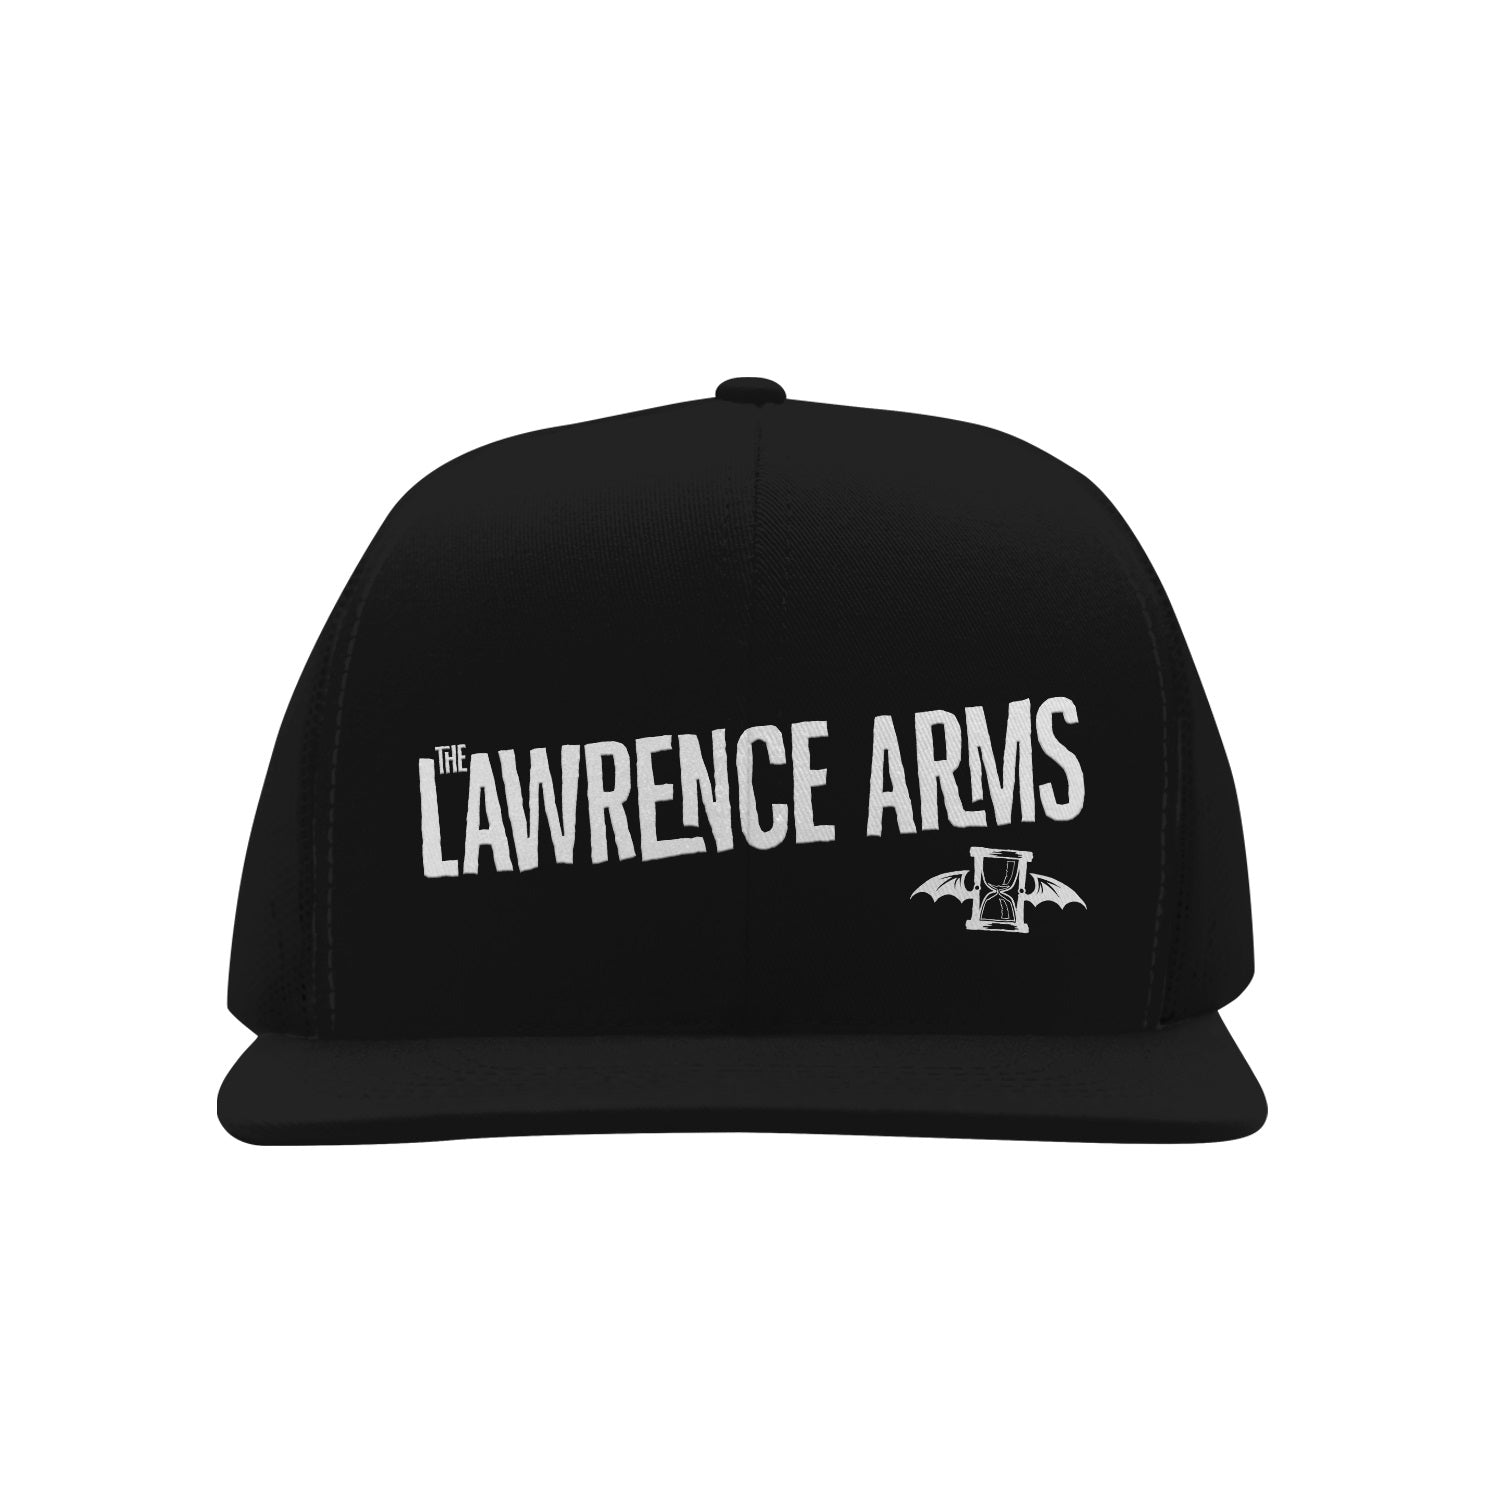 Image of a black trucker hat against a white background. The center of the hat in white text says the lawrence arms. Under the word "arms" is the lawrence arms logo, which is a white hourglass with wings.